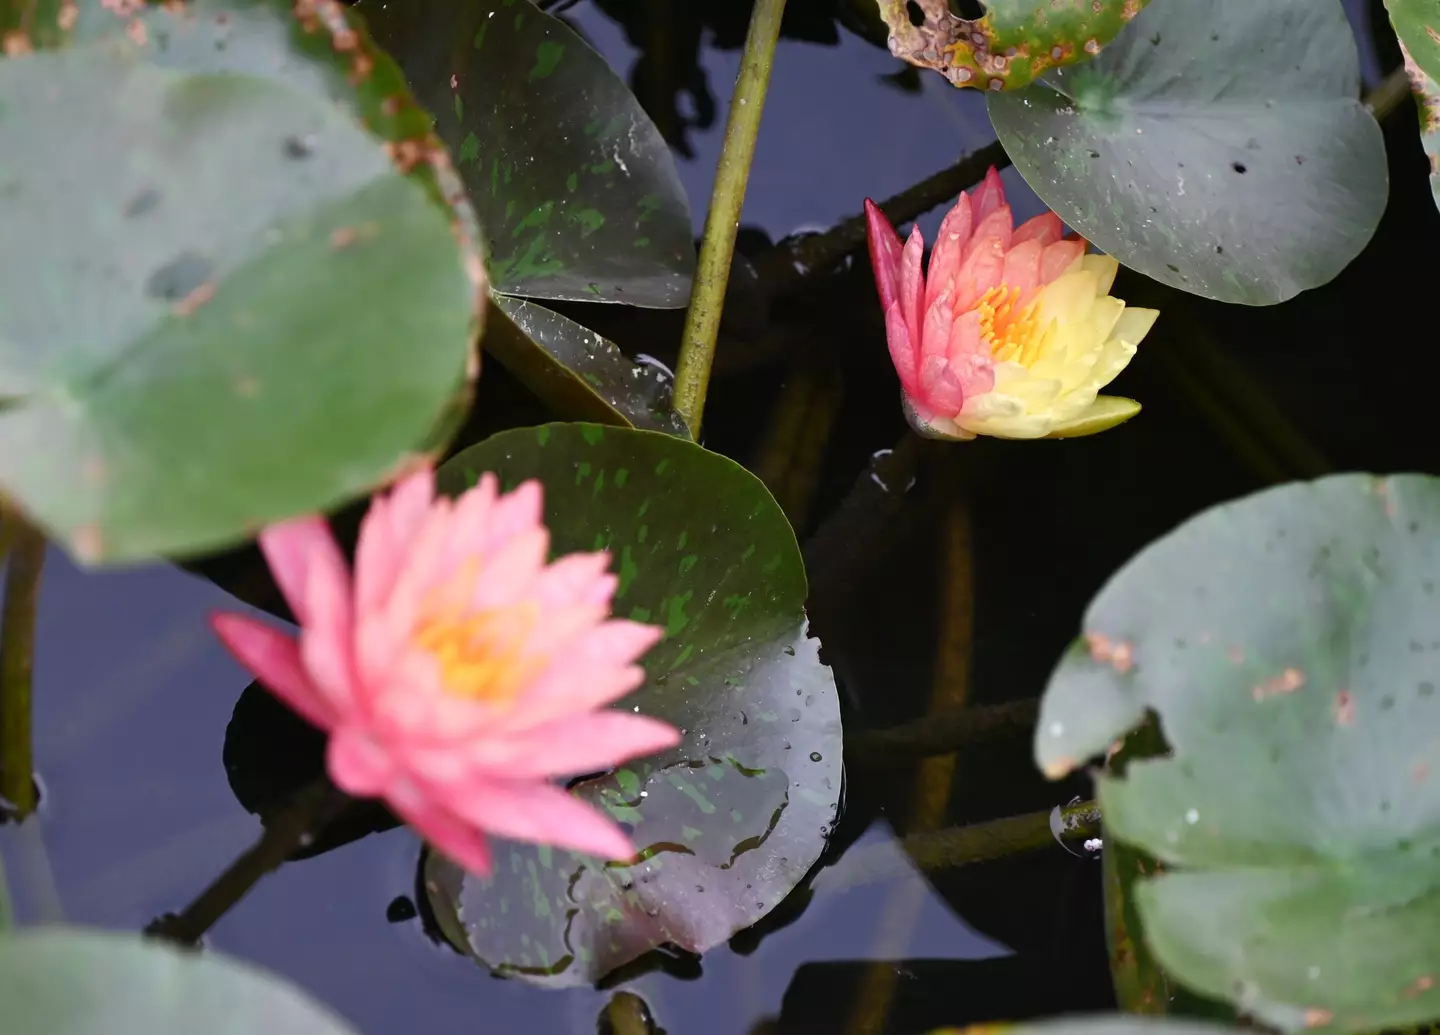 Apparently lotus flowers blooming in China on 8 April are also a sign.